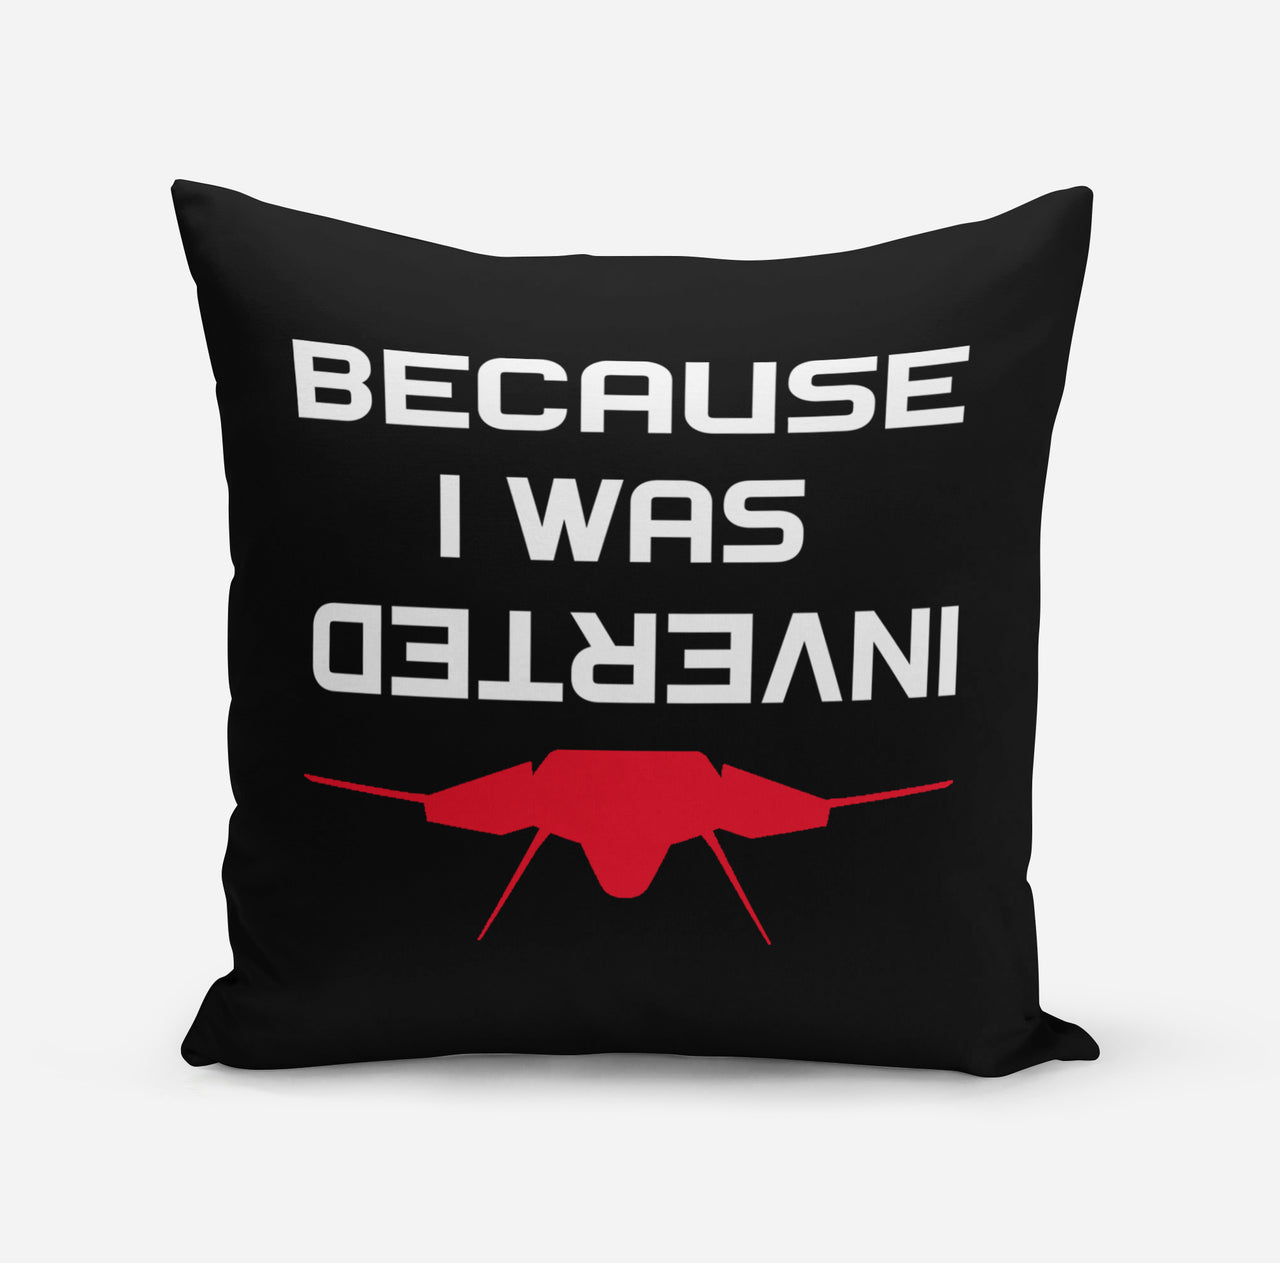 Because I was Inverted Designed Pillows